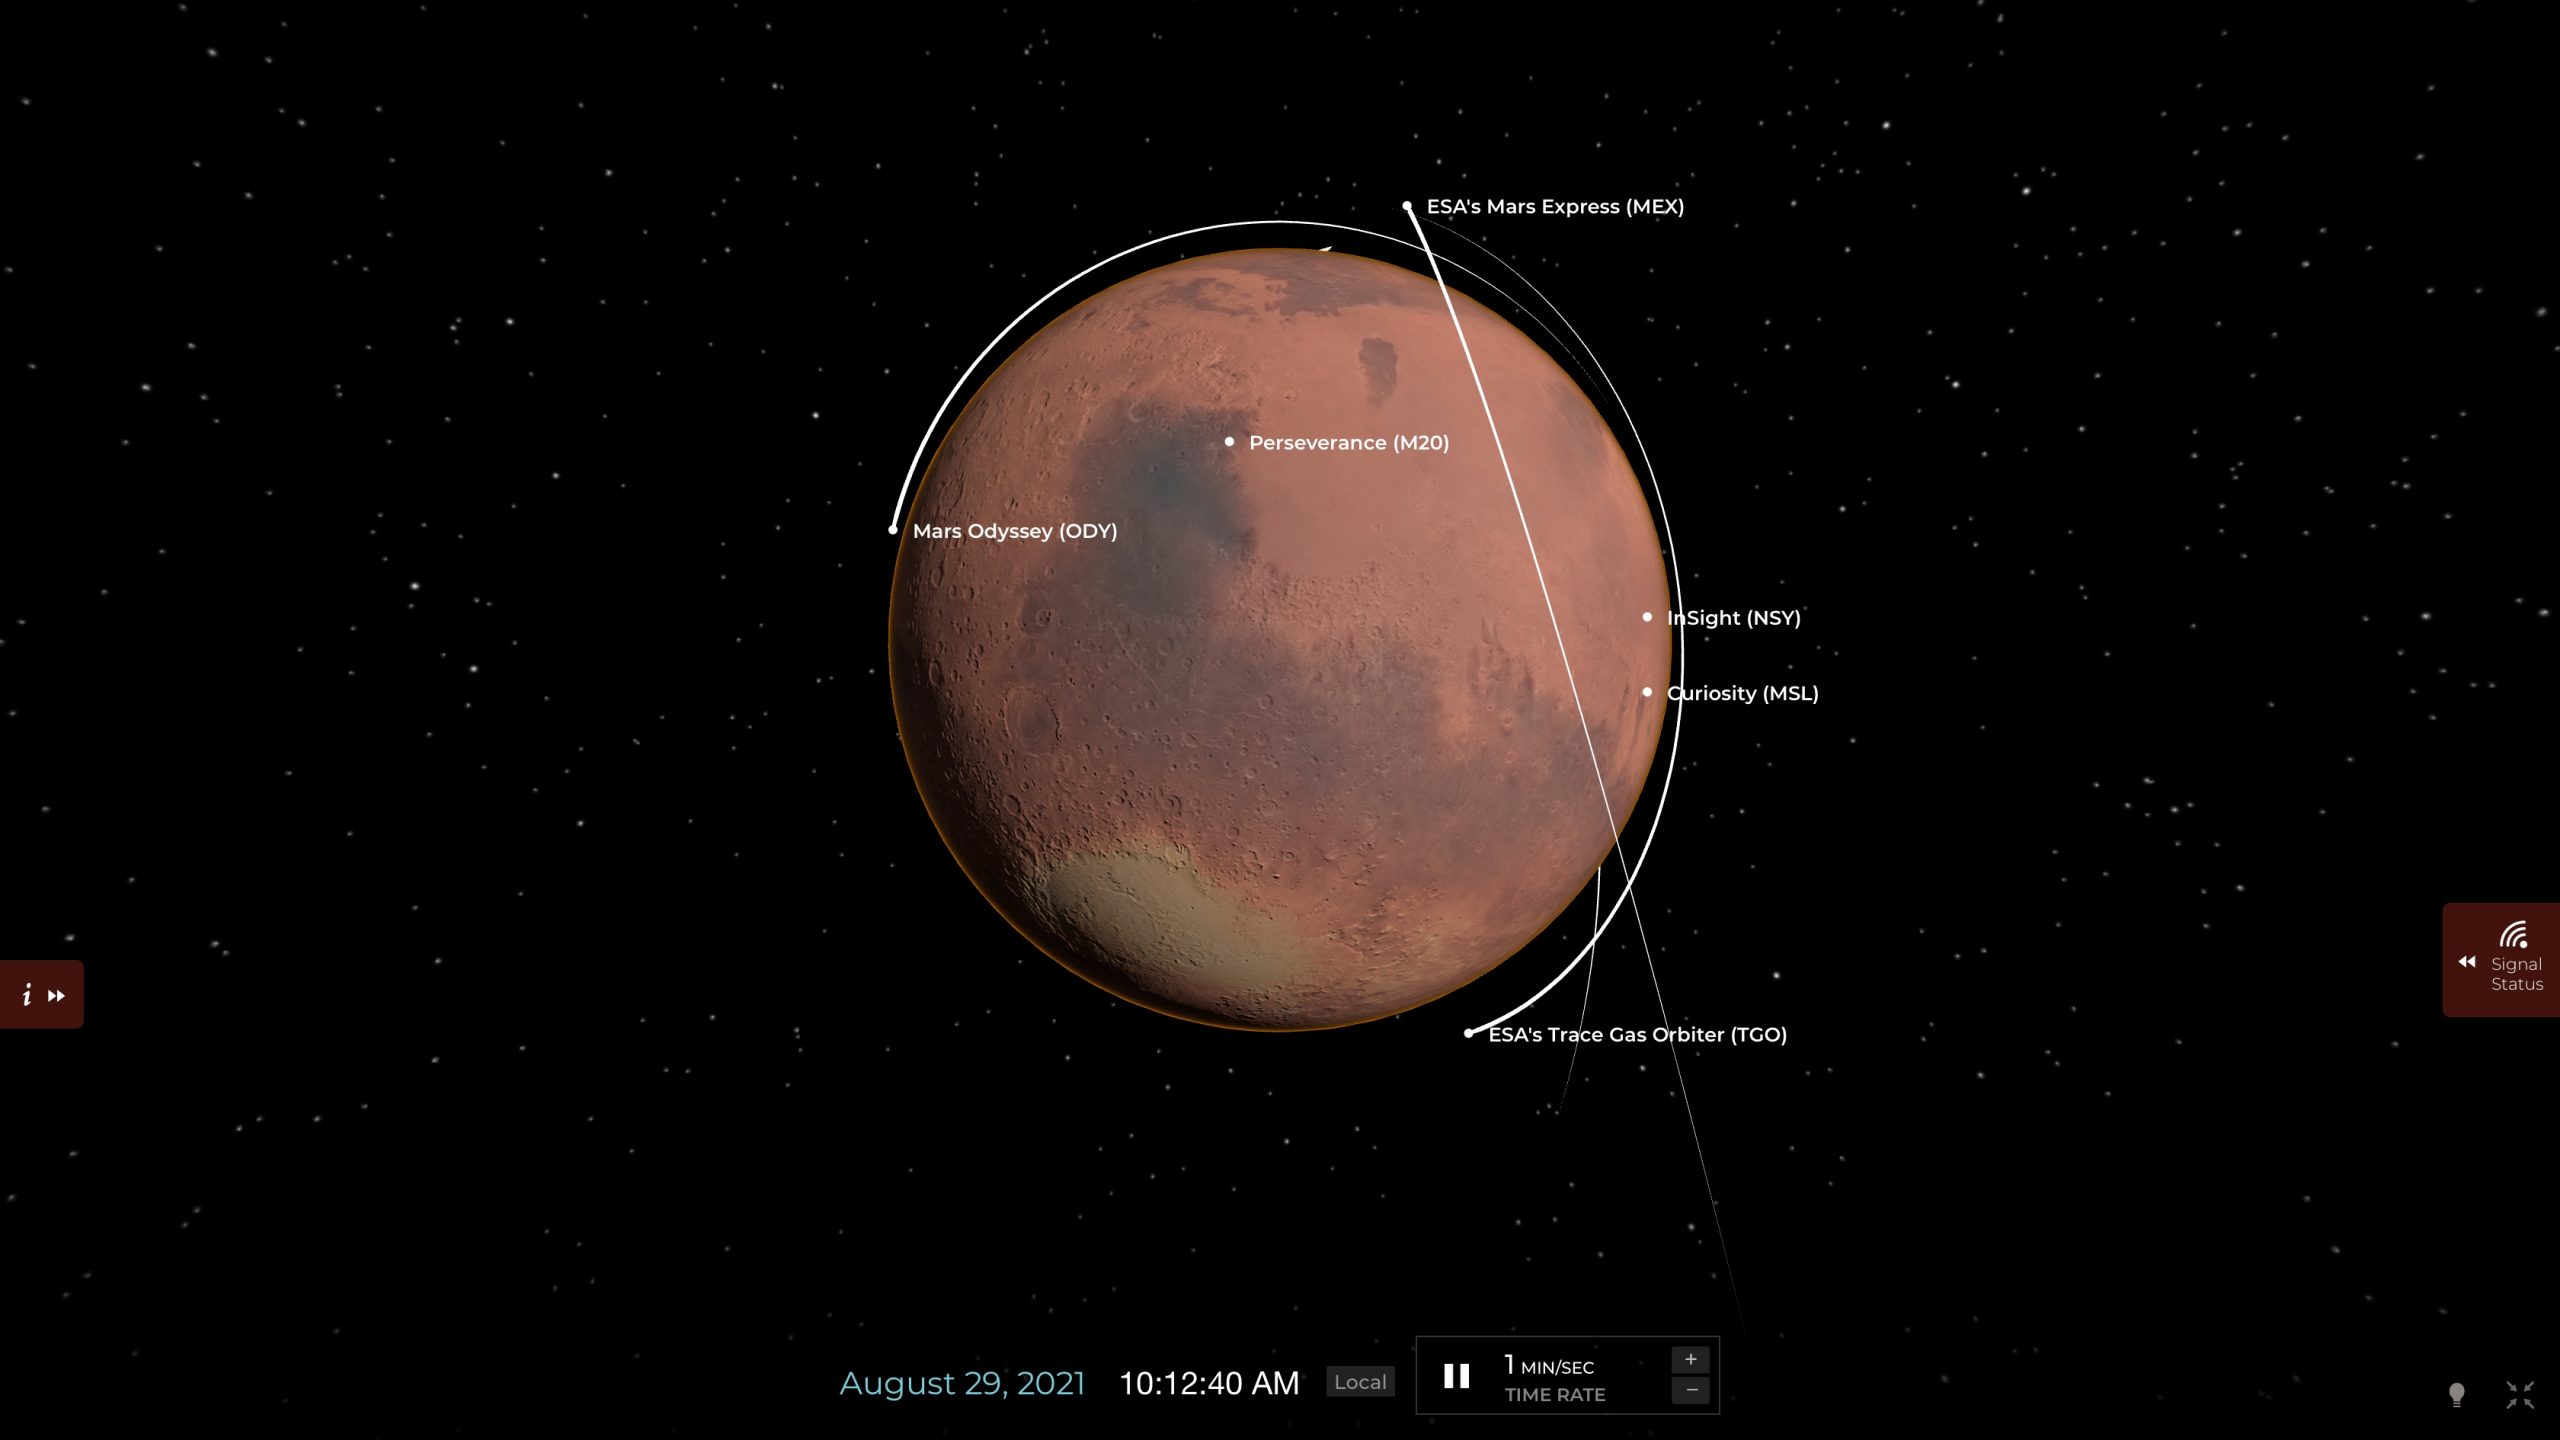 Mars is busy - see where our rovers and satellites are everywhere

